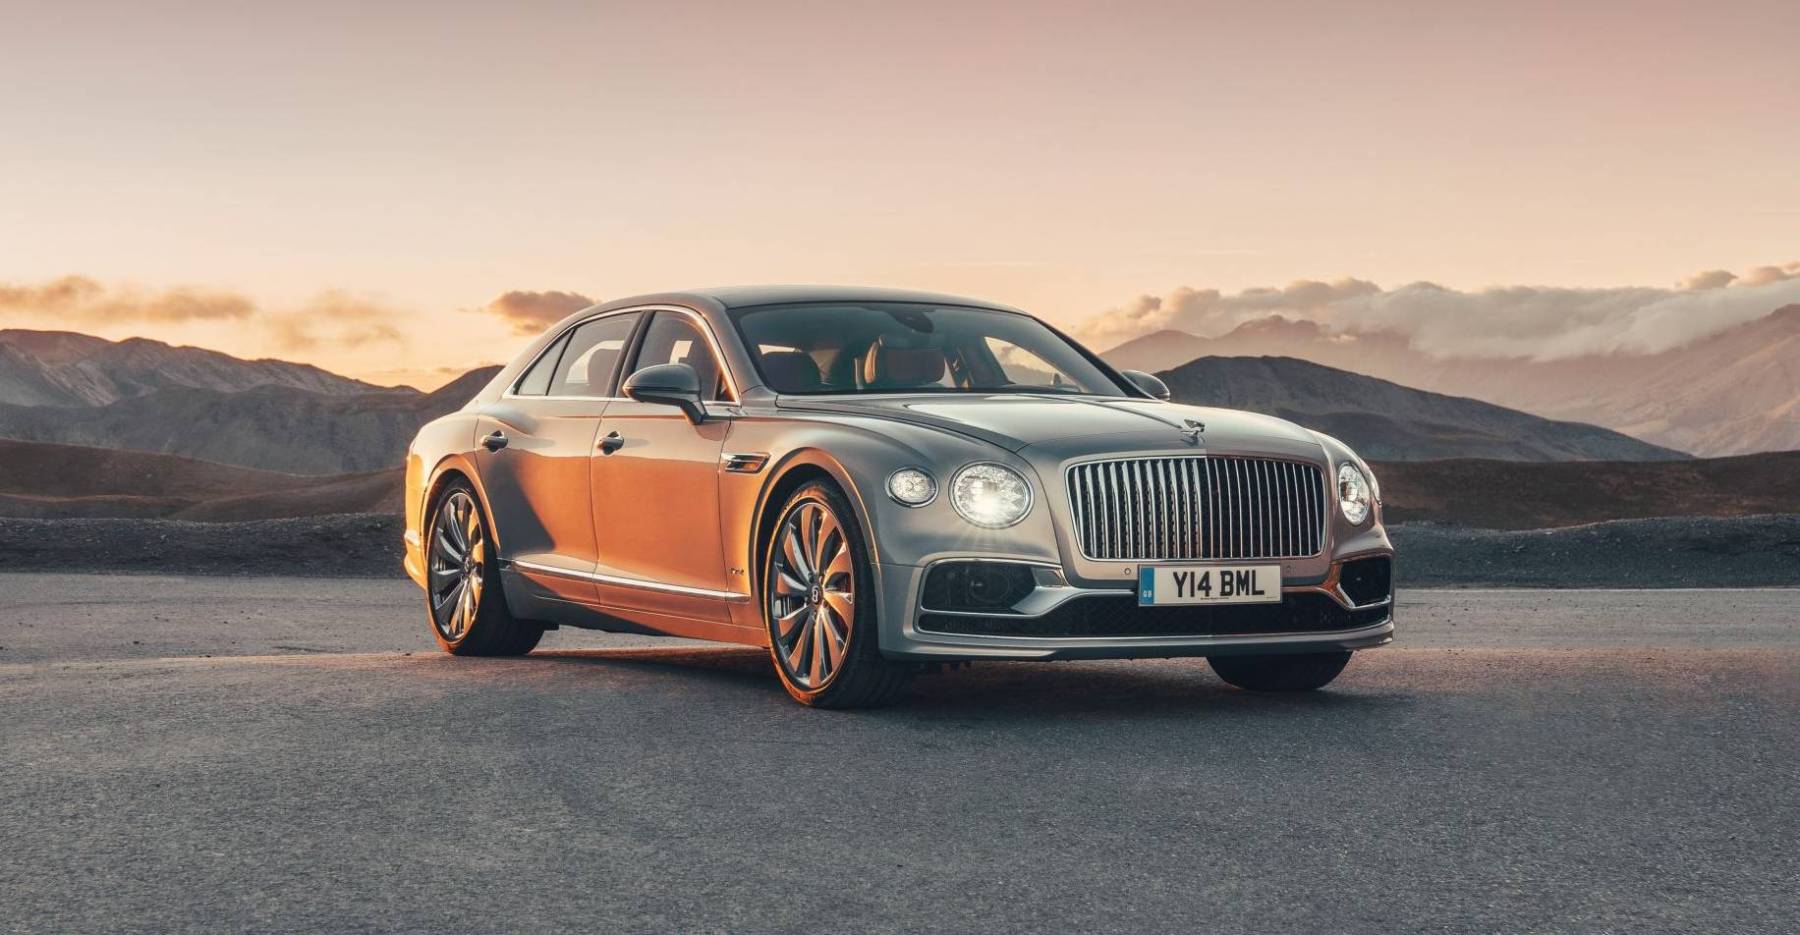 The New Bentley Flying Spur is Perfected Personalized Luxury